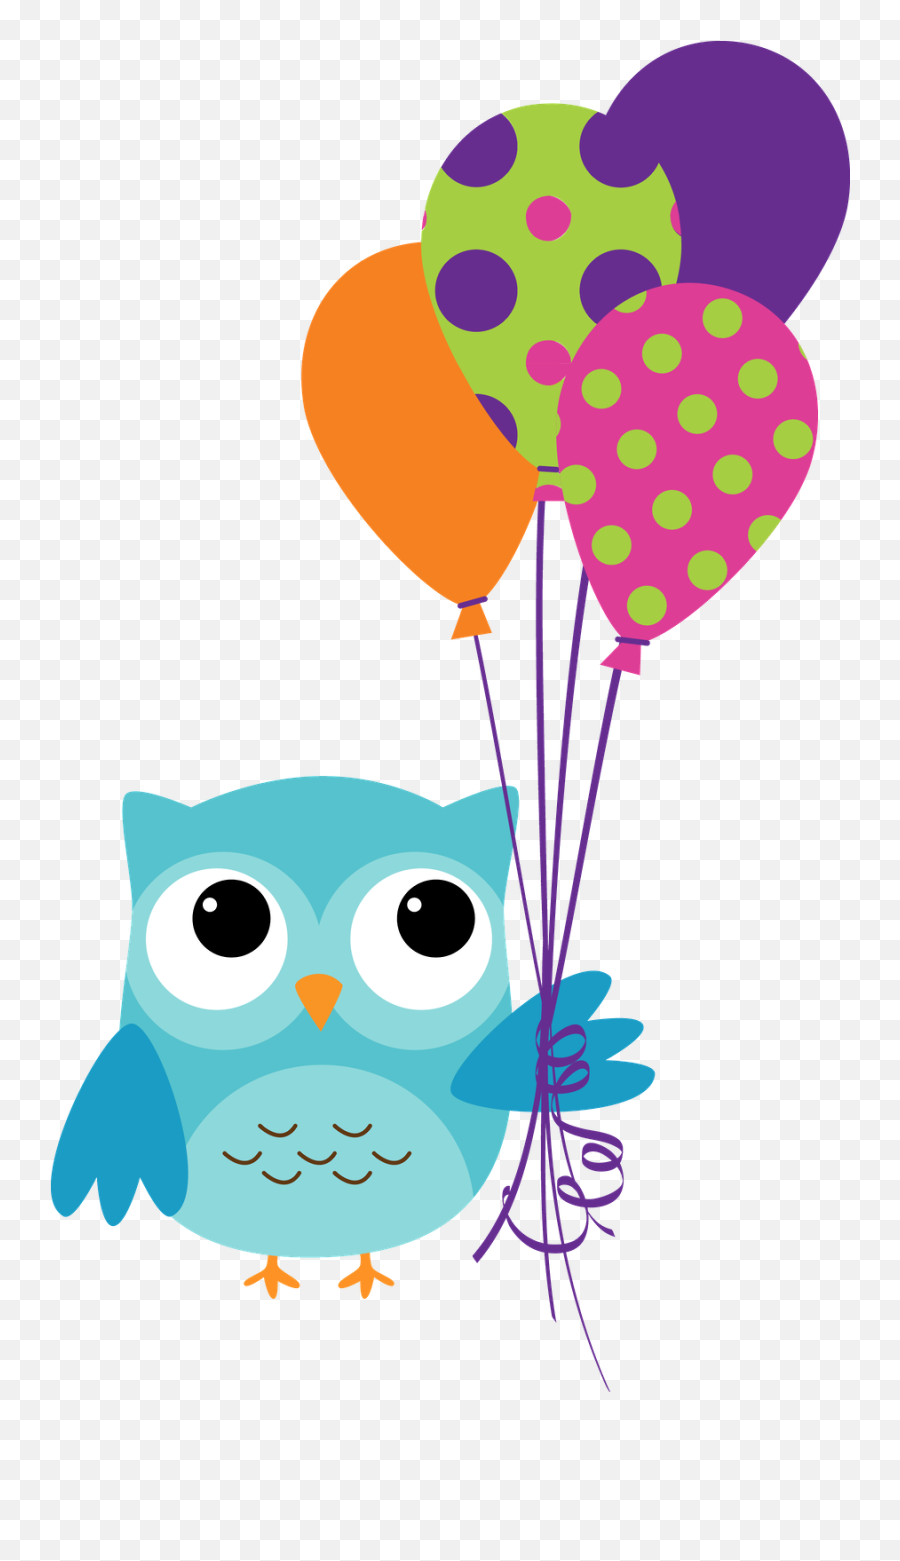 Download Clipart Cupcake Owl - Birthday Owl Clipart Full Birthday Owl Clip Art Emoji,Owl Clipart